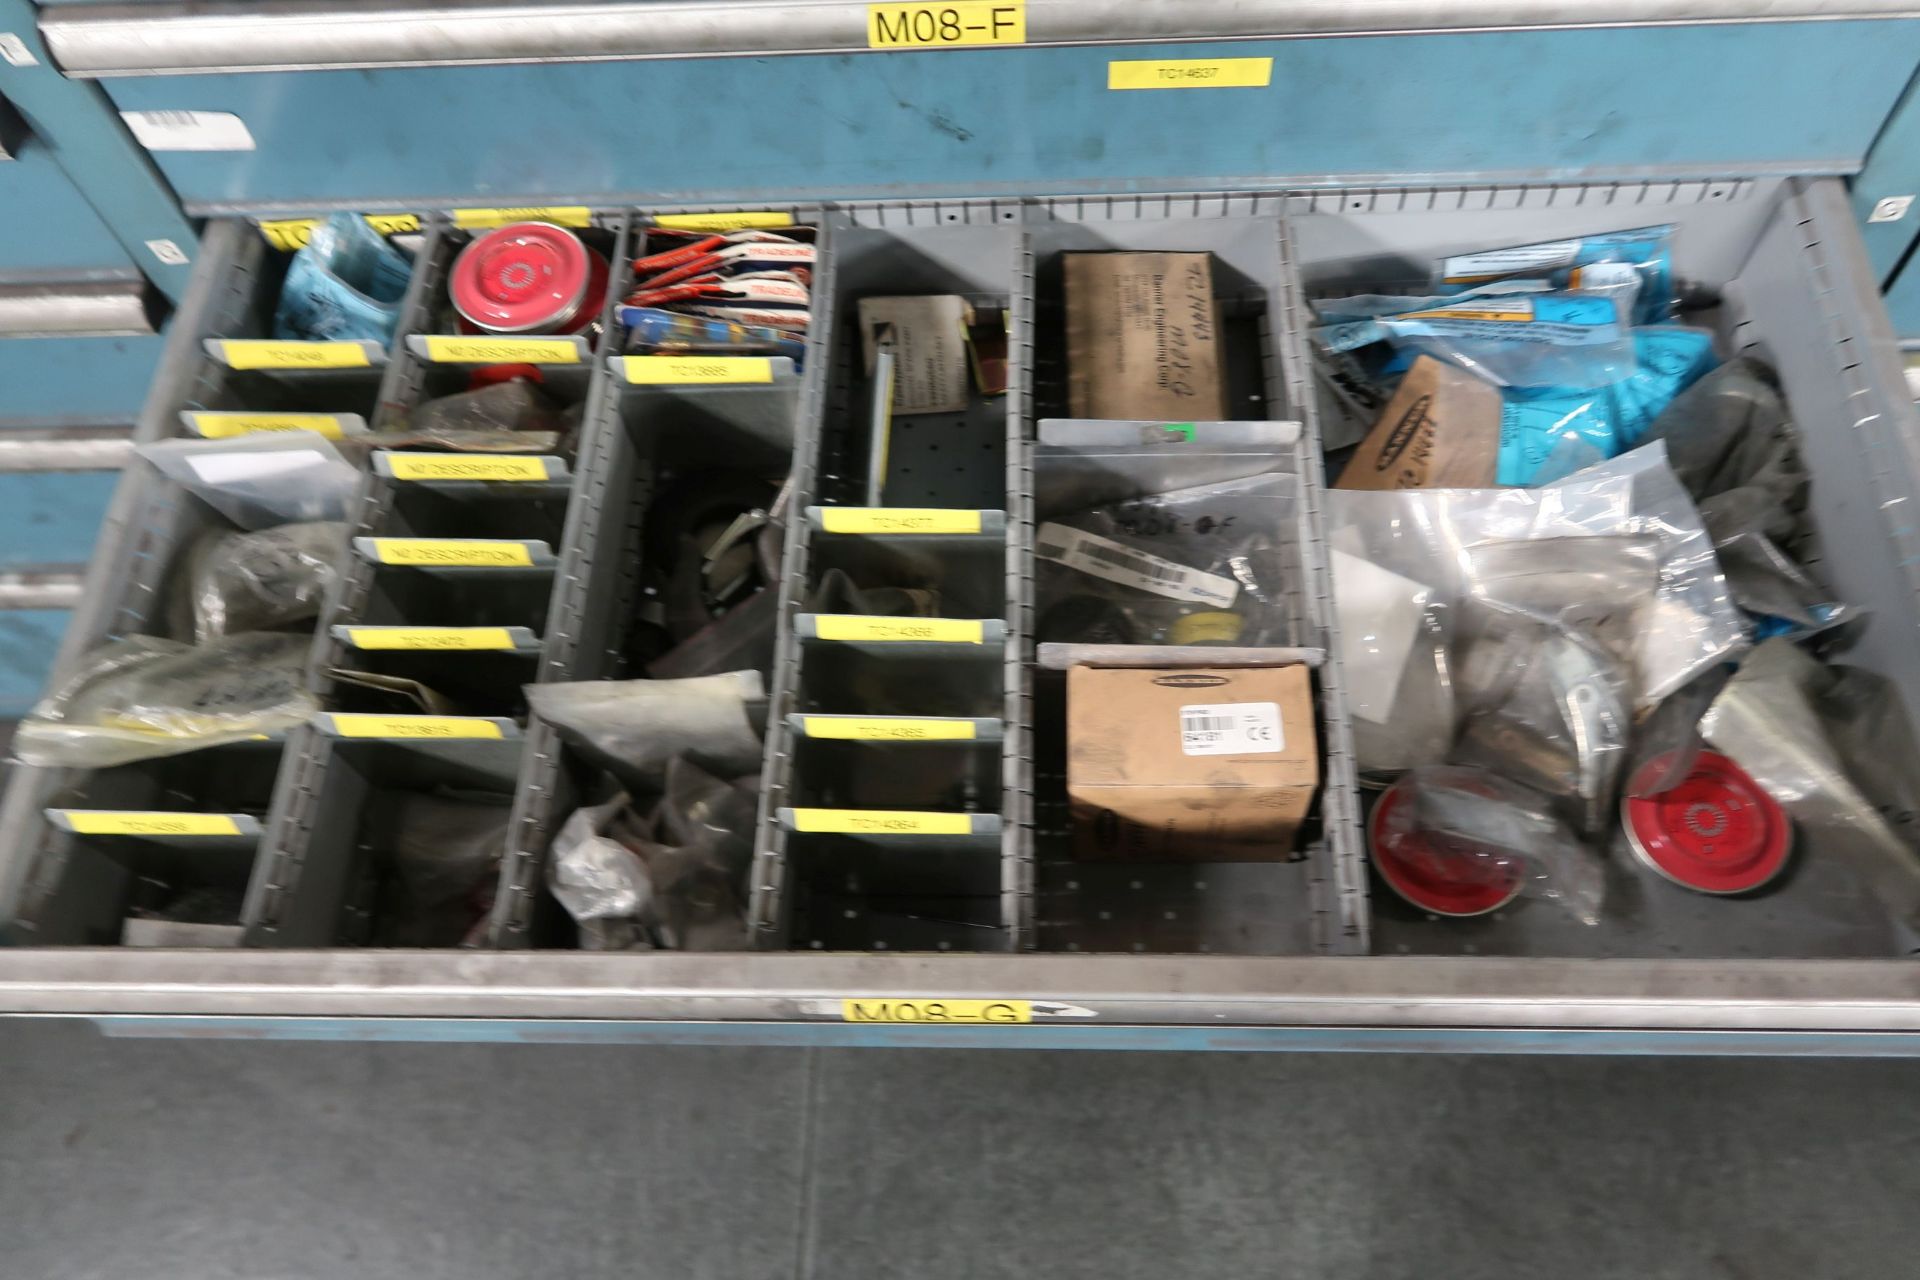 TOOLING CABINETS WITH CONTENTS - MOSTLY MACHINE PARTS **LOADING PRICE DUE TO ERRA - $2,000.00** - Image 49 of 59